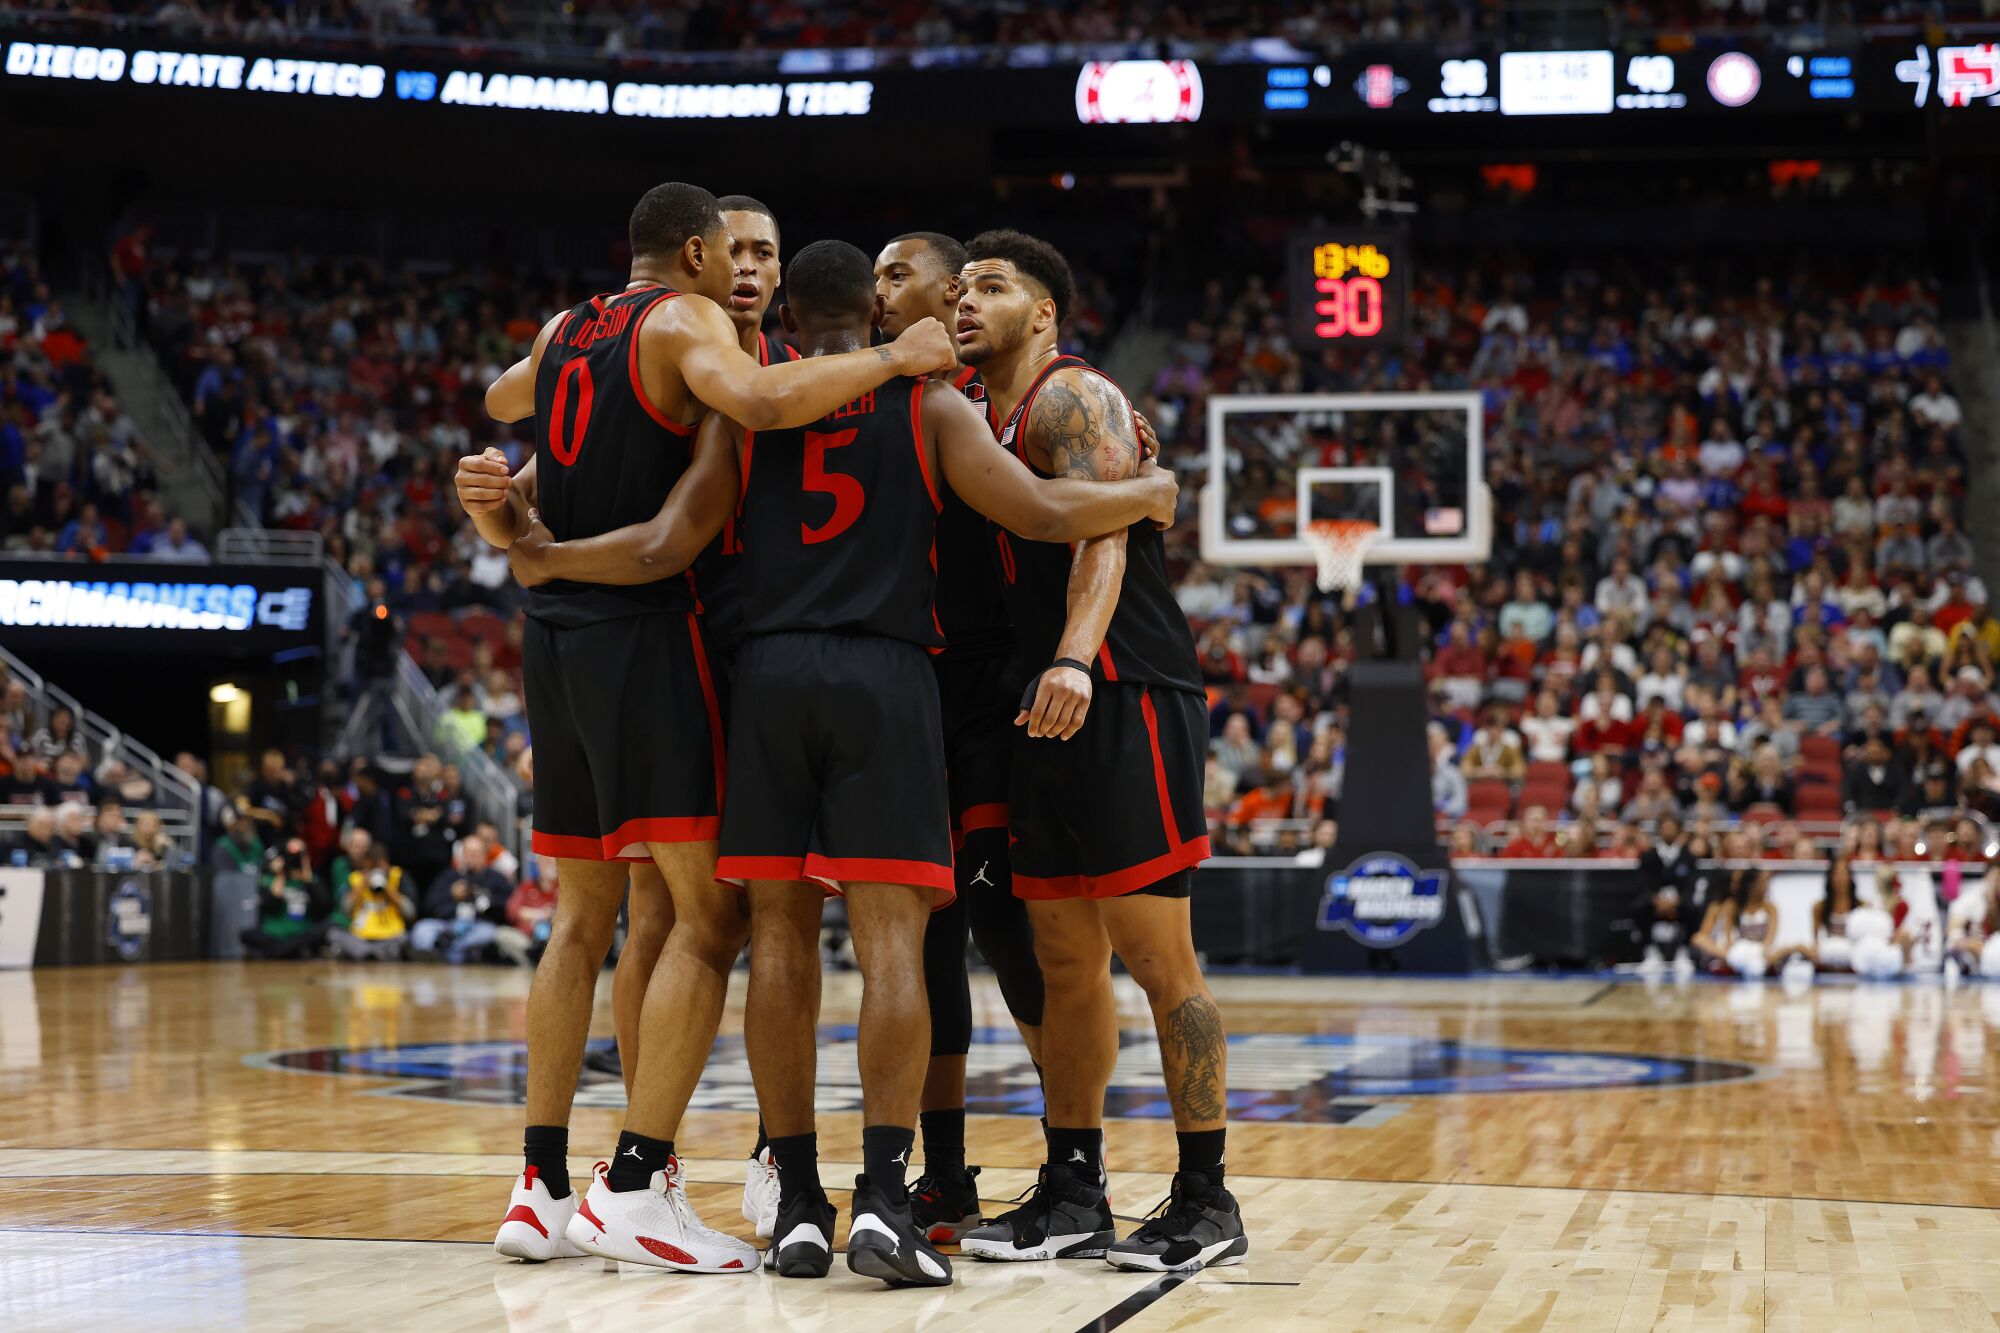 San Diego State players gather on the court during Friday's win over Alabama.